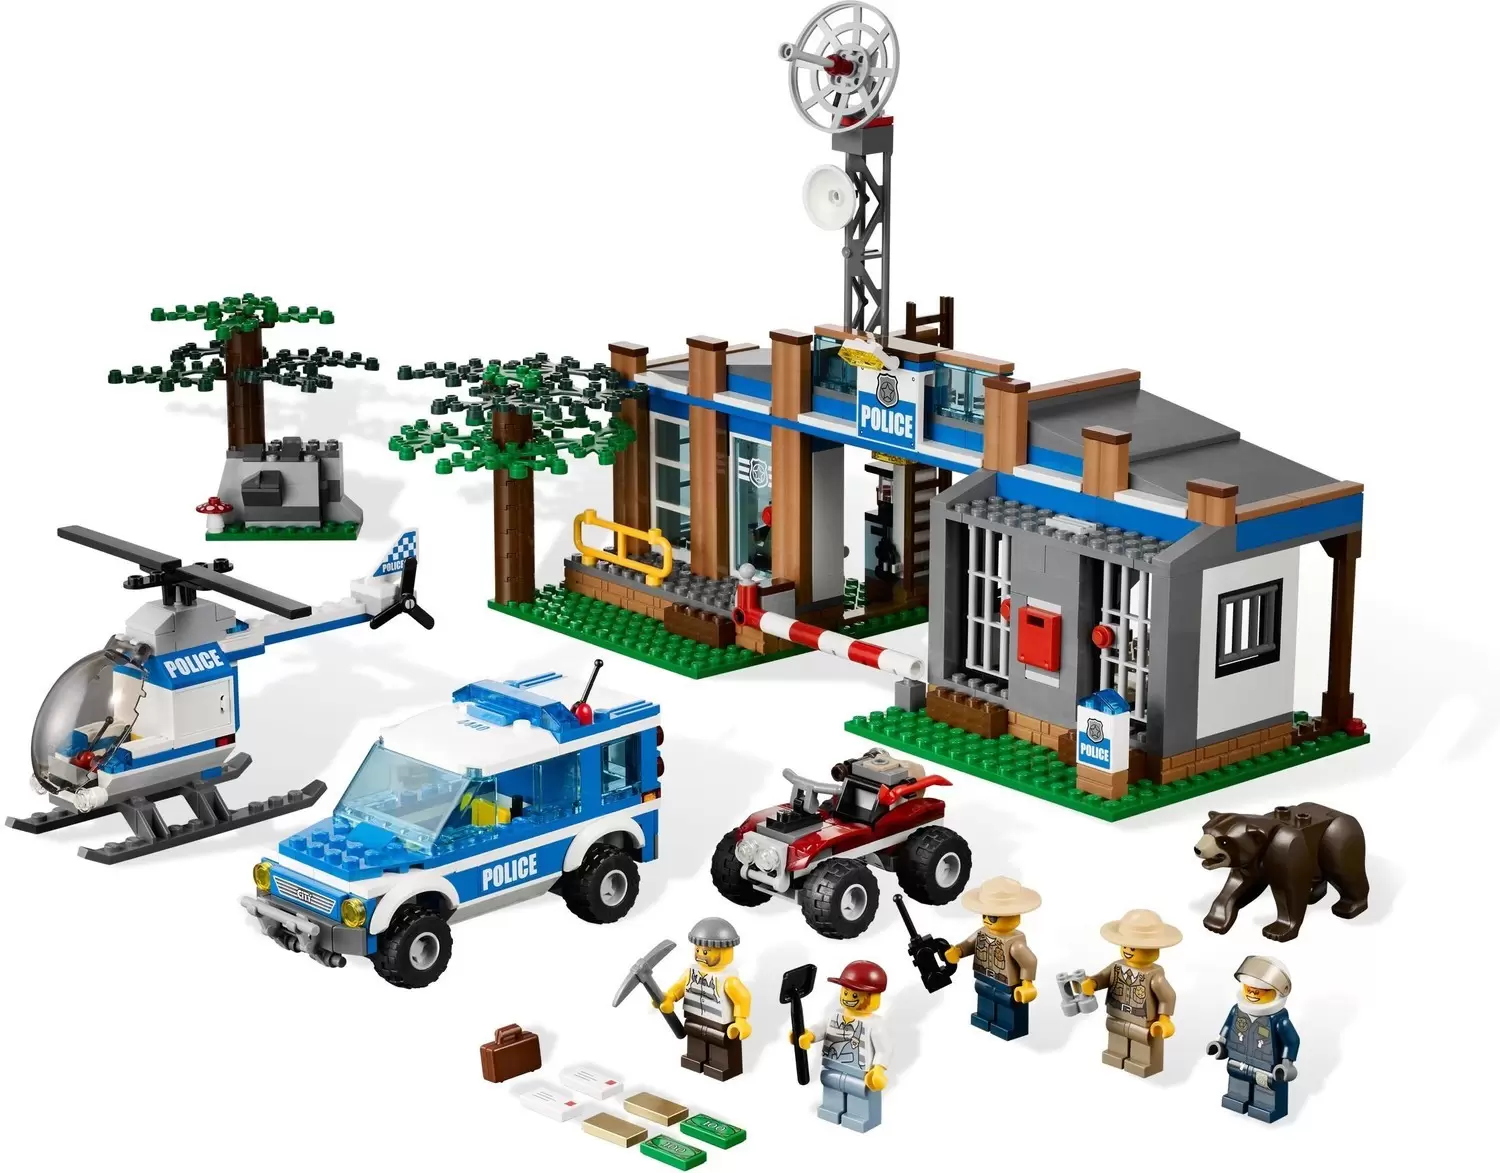 LEGO CITY - Forest Police Station